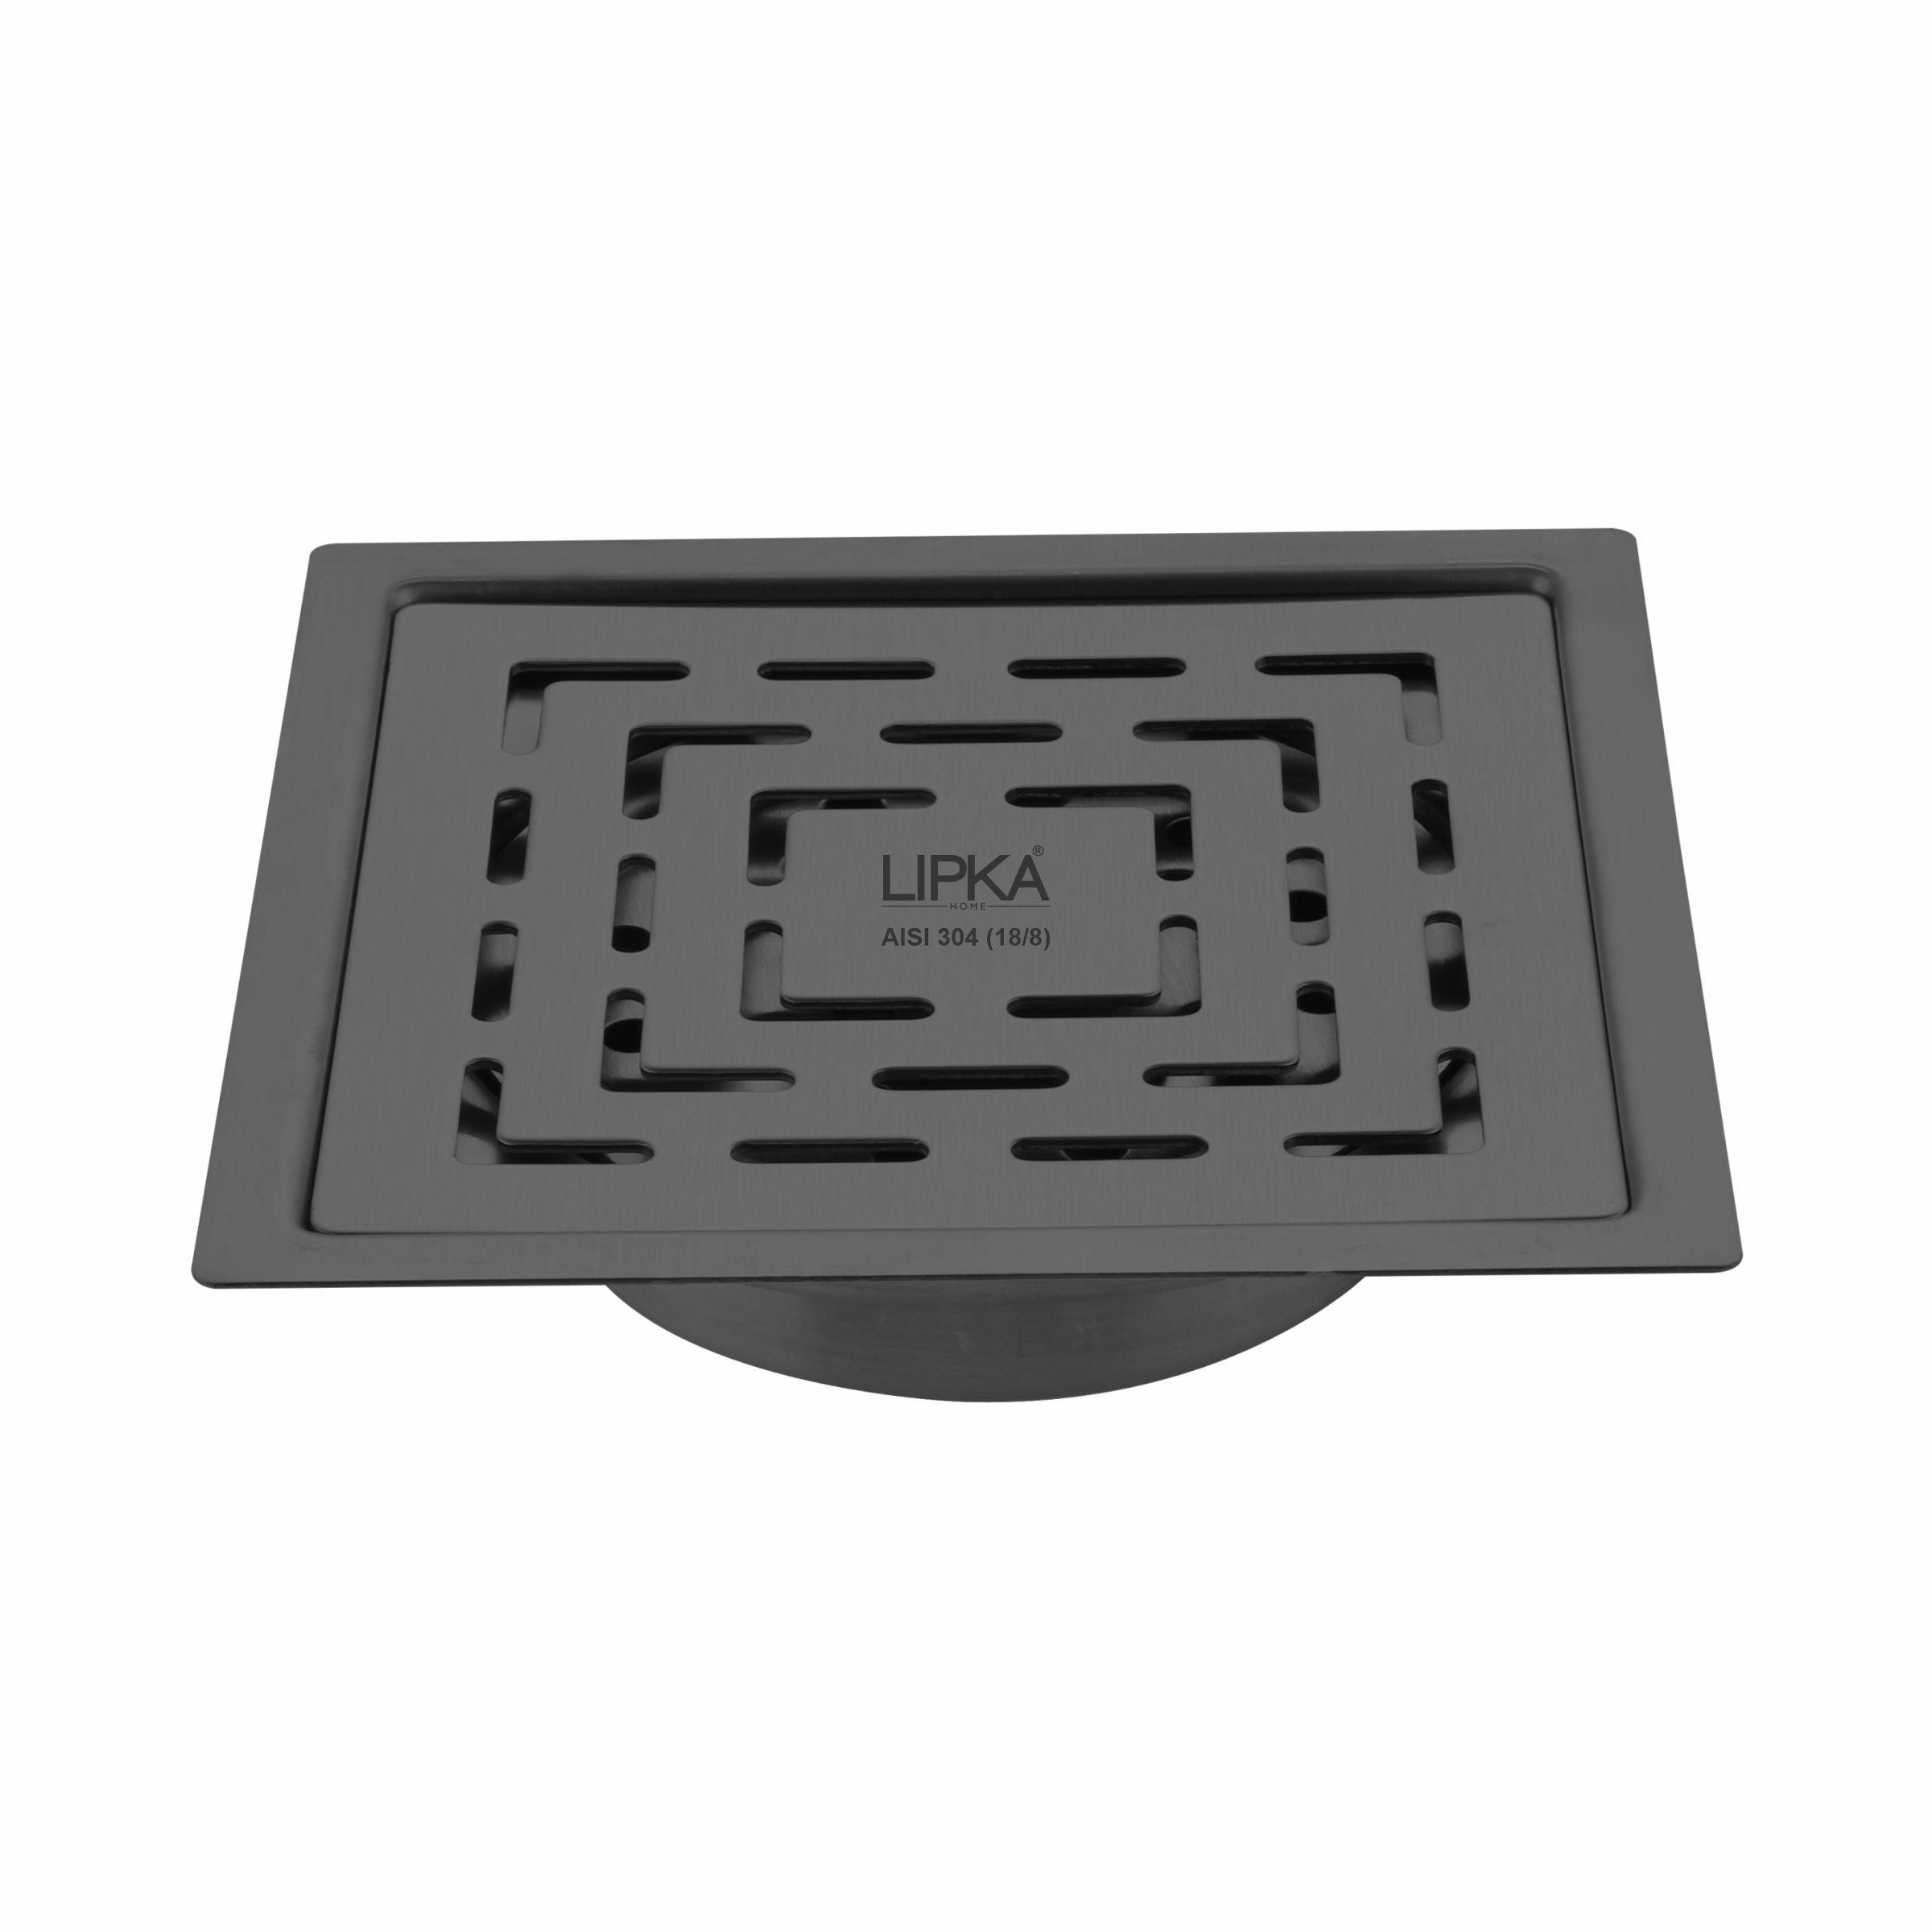 Orange Exclusive Square Flat Cut Floor Drain in Black PVD Coating (6 x 6 Inches) with Cockroach Trap 